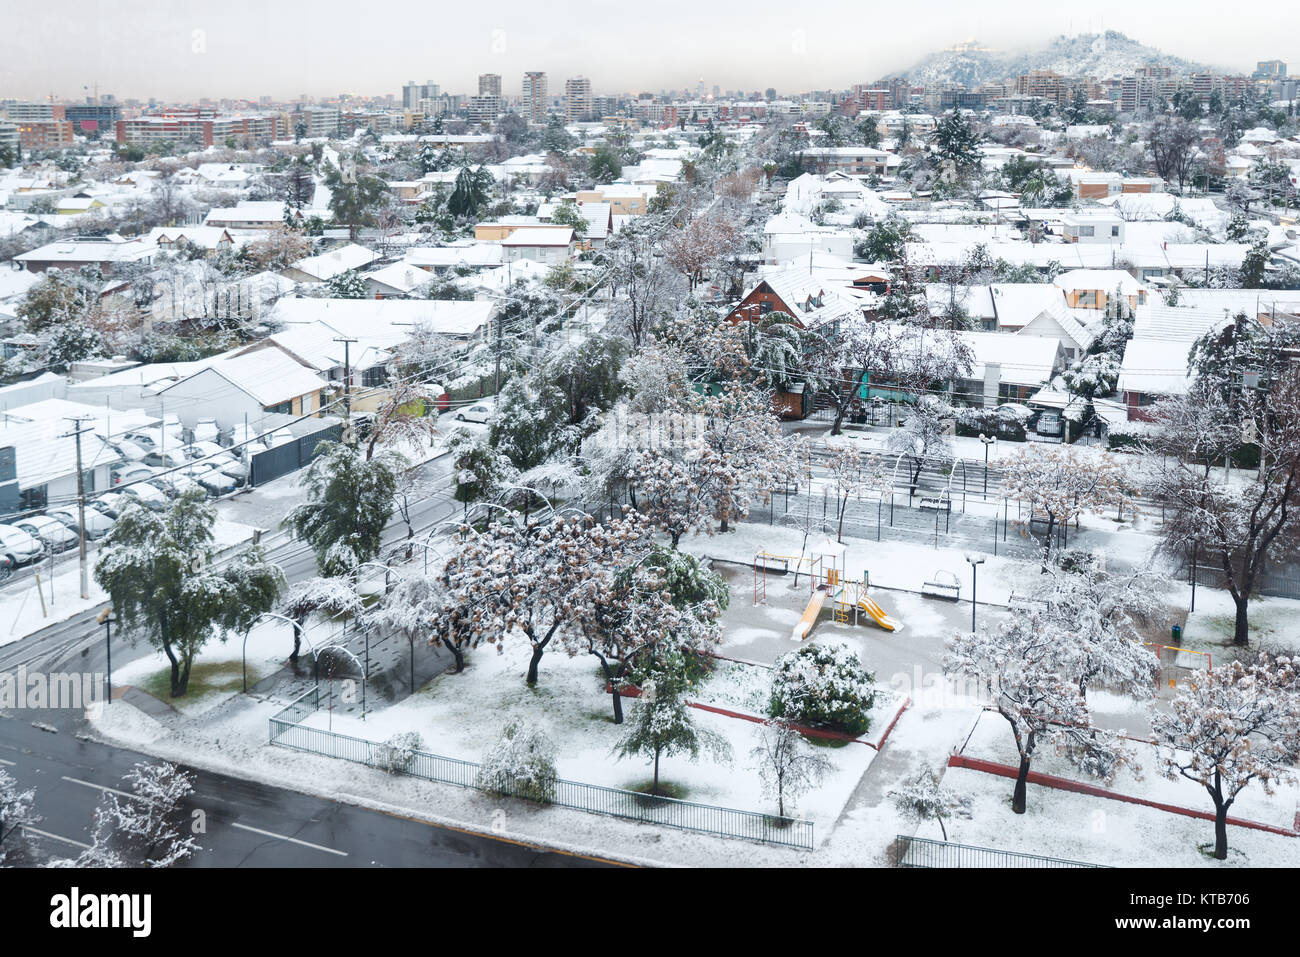 Santiago, Region Metropolitana, Chile - July 15, 2017: The city was completely covered by snow, an unusual phenomenon that happens once every 20 years Stock Photo